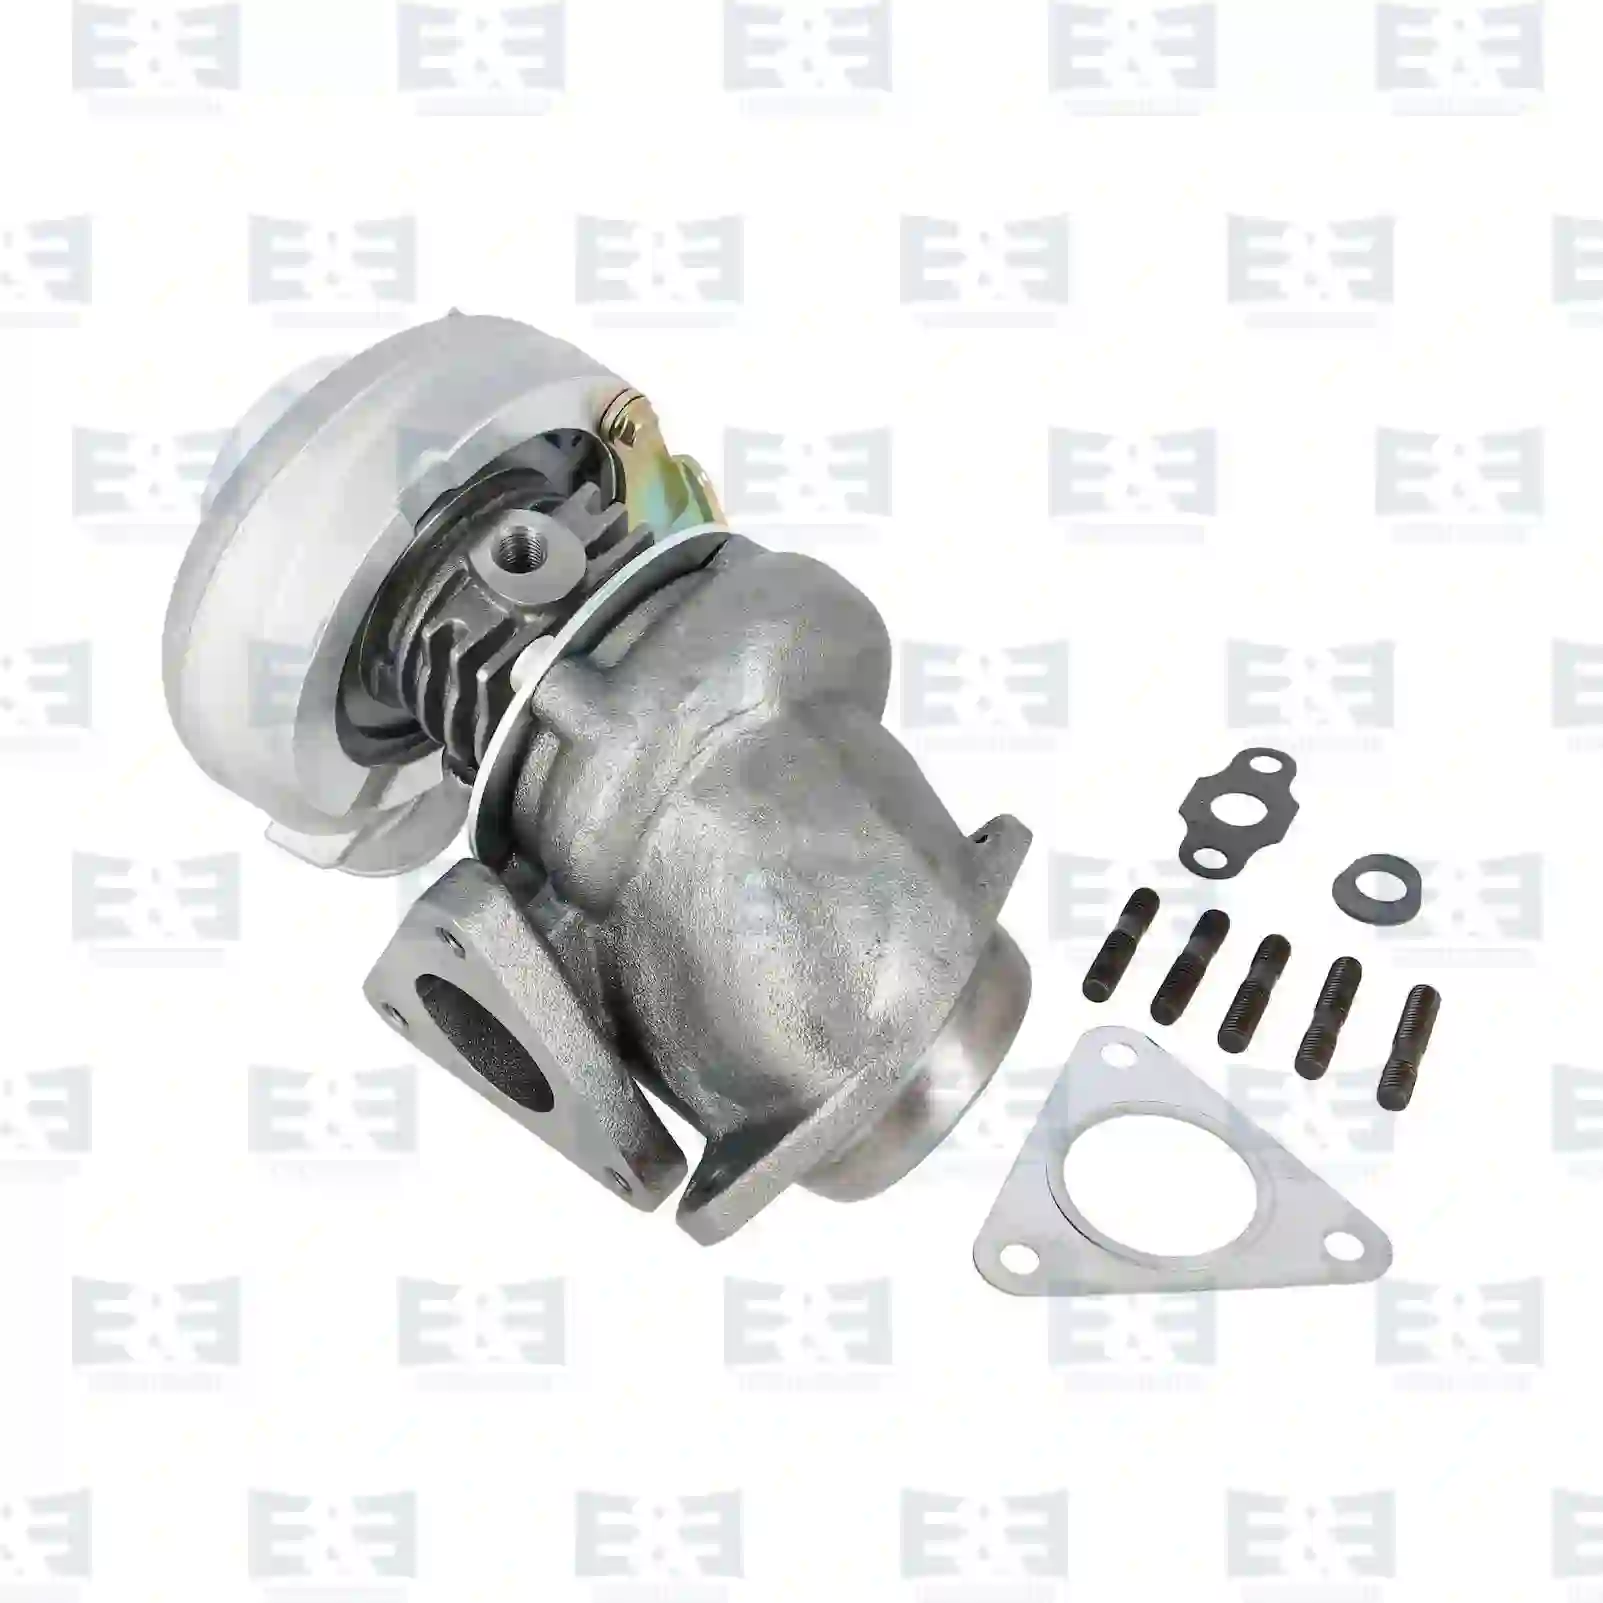 Turbocharger Turbocharger, with gasket kit, EE No 2E2200753 ,  oem no:6010900280, 6010900480, 6010960099, 6020900880, 6020901380, 6020960199, 6020960699, 6020960899, 602096089980 E&E Truck Spare Parts | Truck Spare Parts, Auotomotive Spare Parts